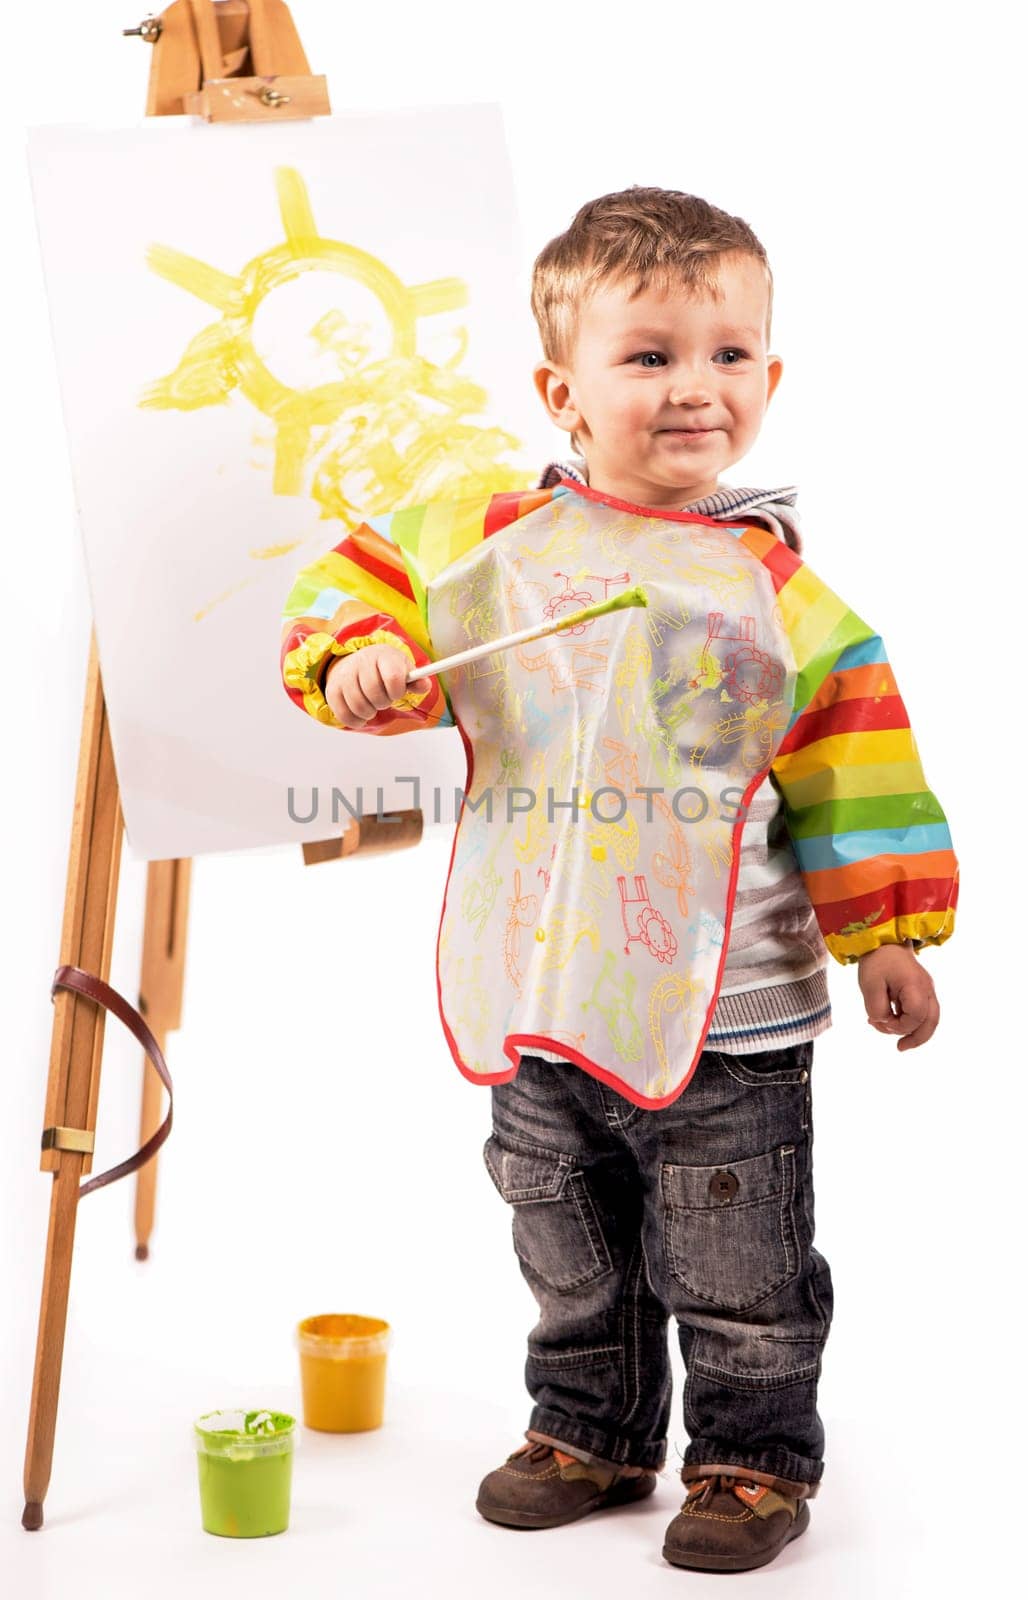 The small artist draws on a white background. The boy draws the sun with paints on a white sheet. by aprilphoto